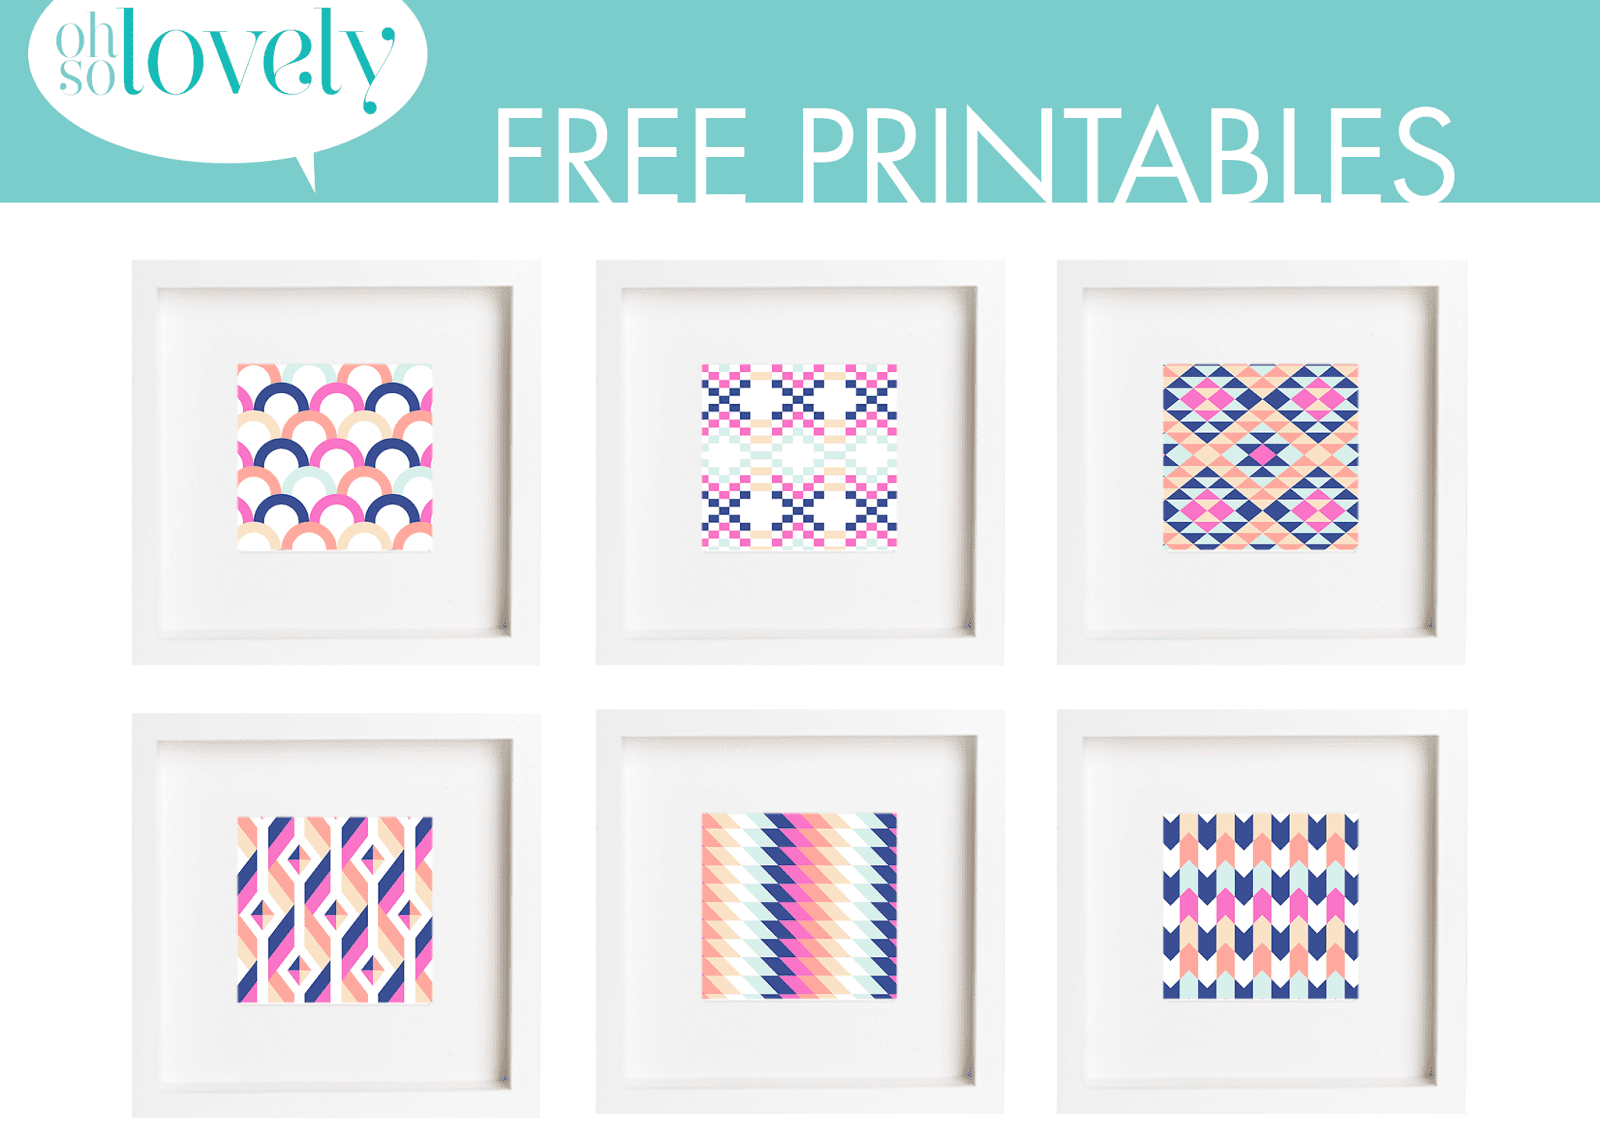 11 Places To Find Free, Printable Wall Art Online - Free Printable Artwork